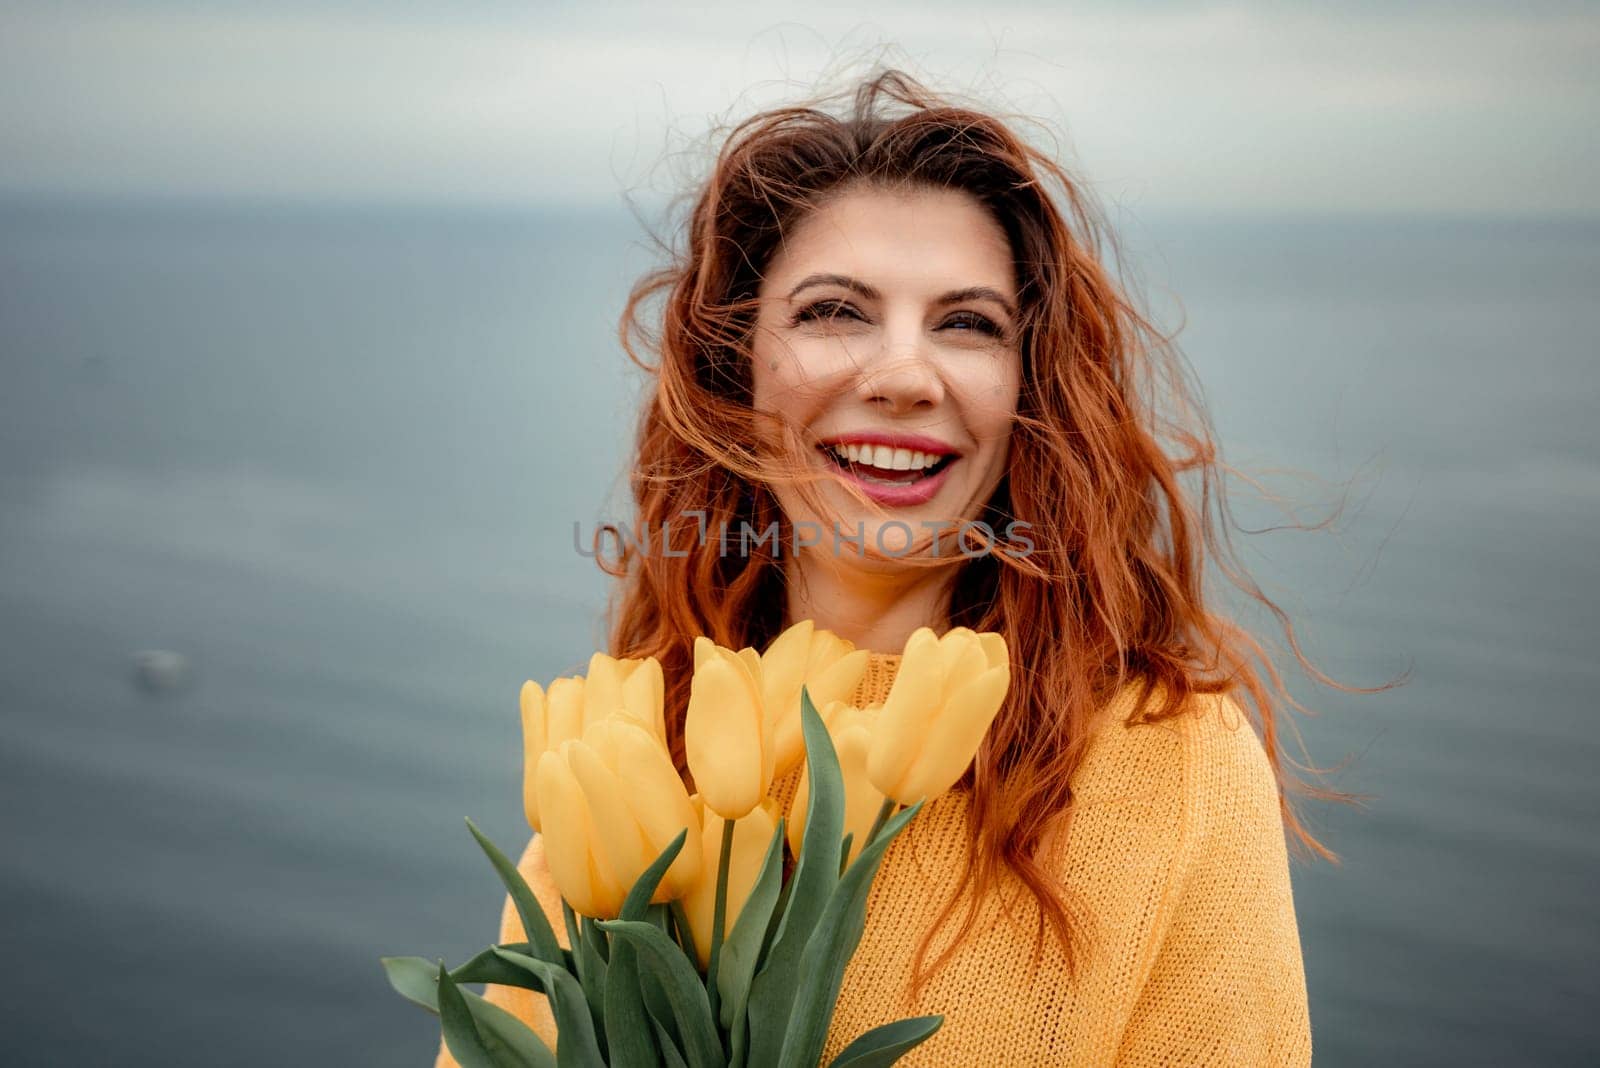 Portrait of a happy woman with hair flying in the wind against the backdrop of mountains and sea. Holding a bouquet of yellow tulips in her hands, wearing a yellow sweater by Matiunina